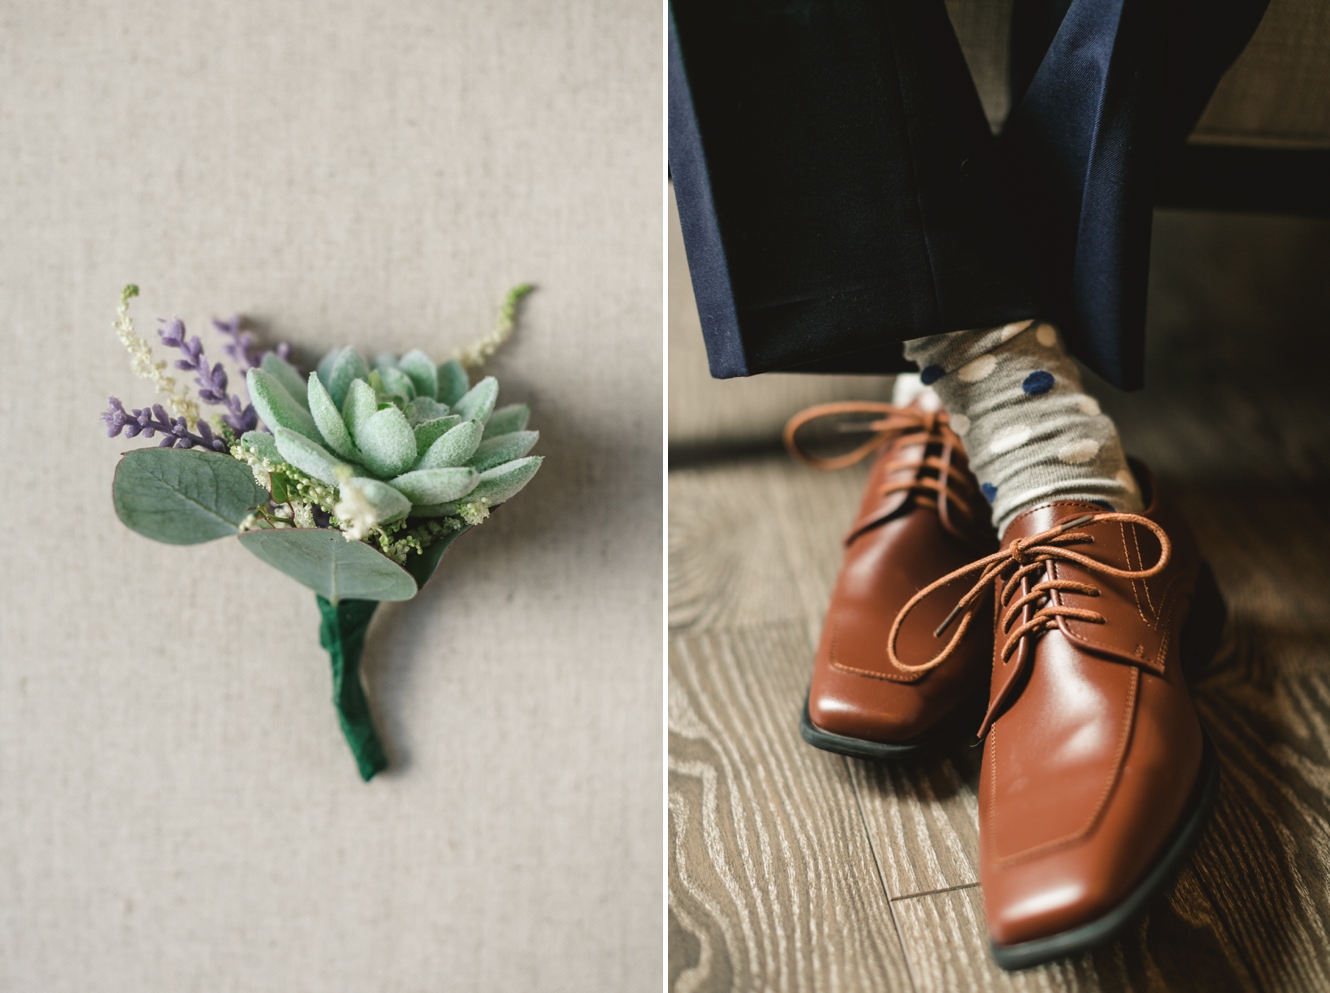 How to photograph groom's details